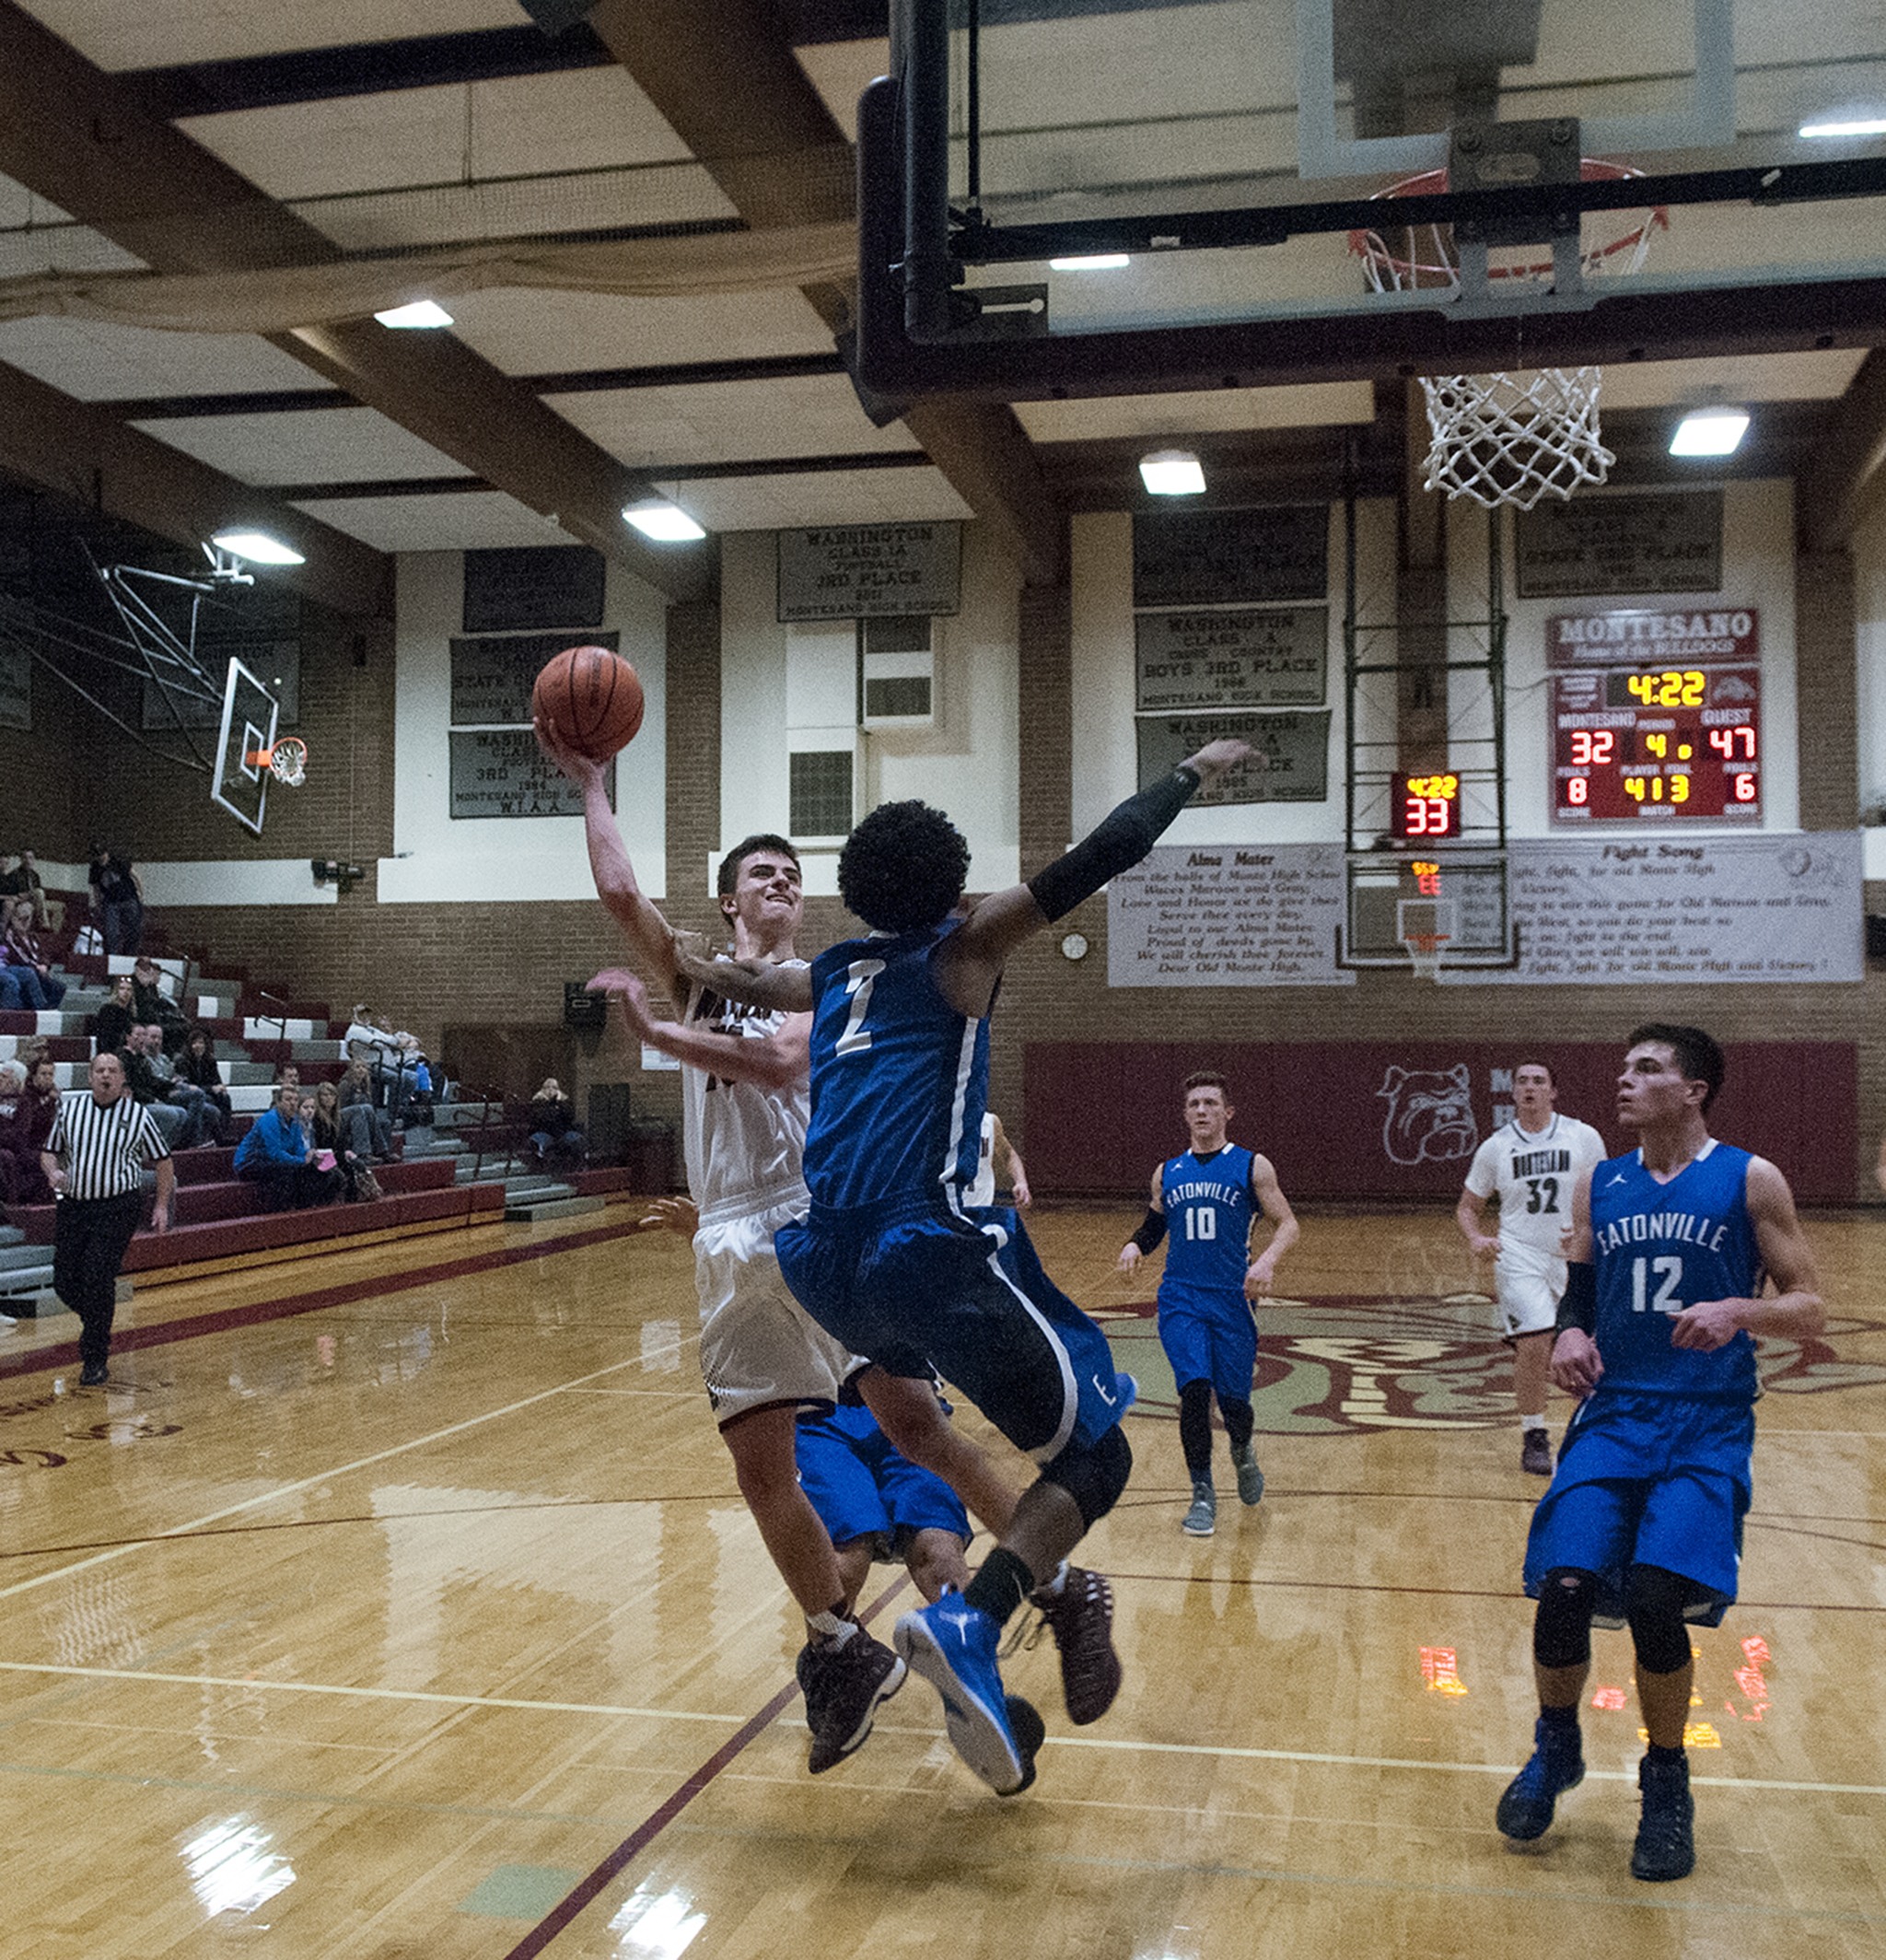 (Brendan Carl | The Daily World) Montesano’s Trevor Ridgway goes up for a shot agianst Eatonville on Friday. Ridgway was fouled and made both free throws.